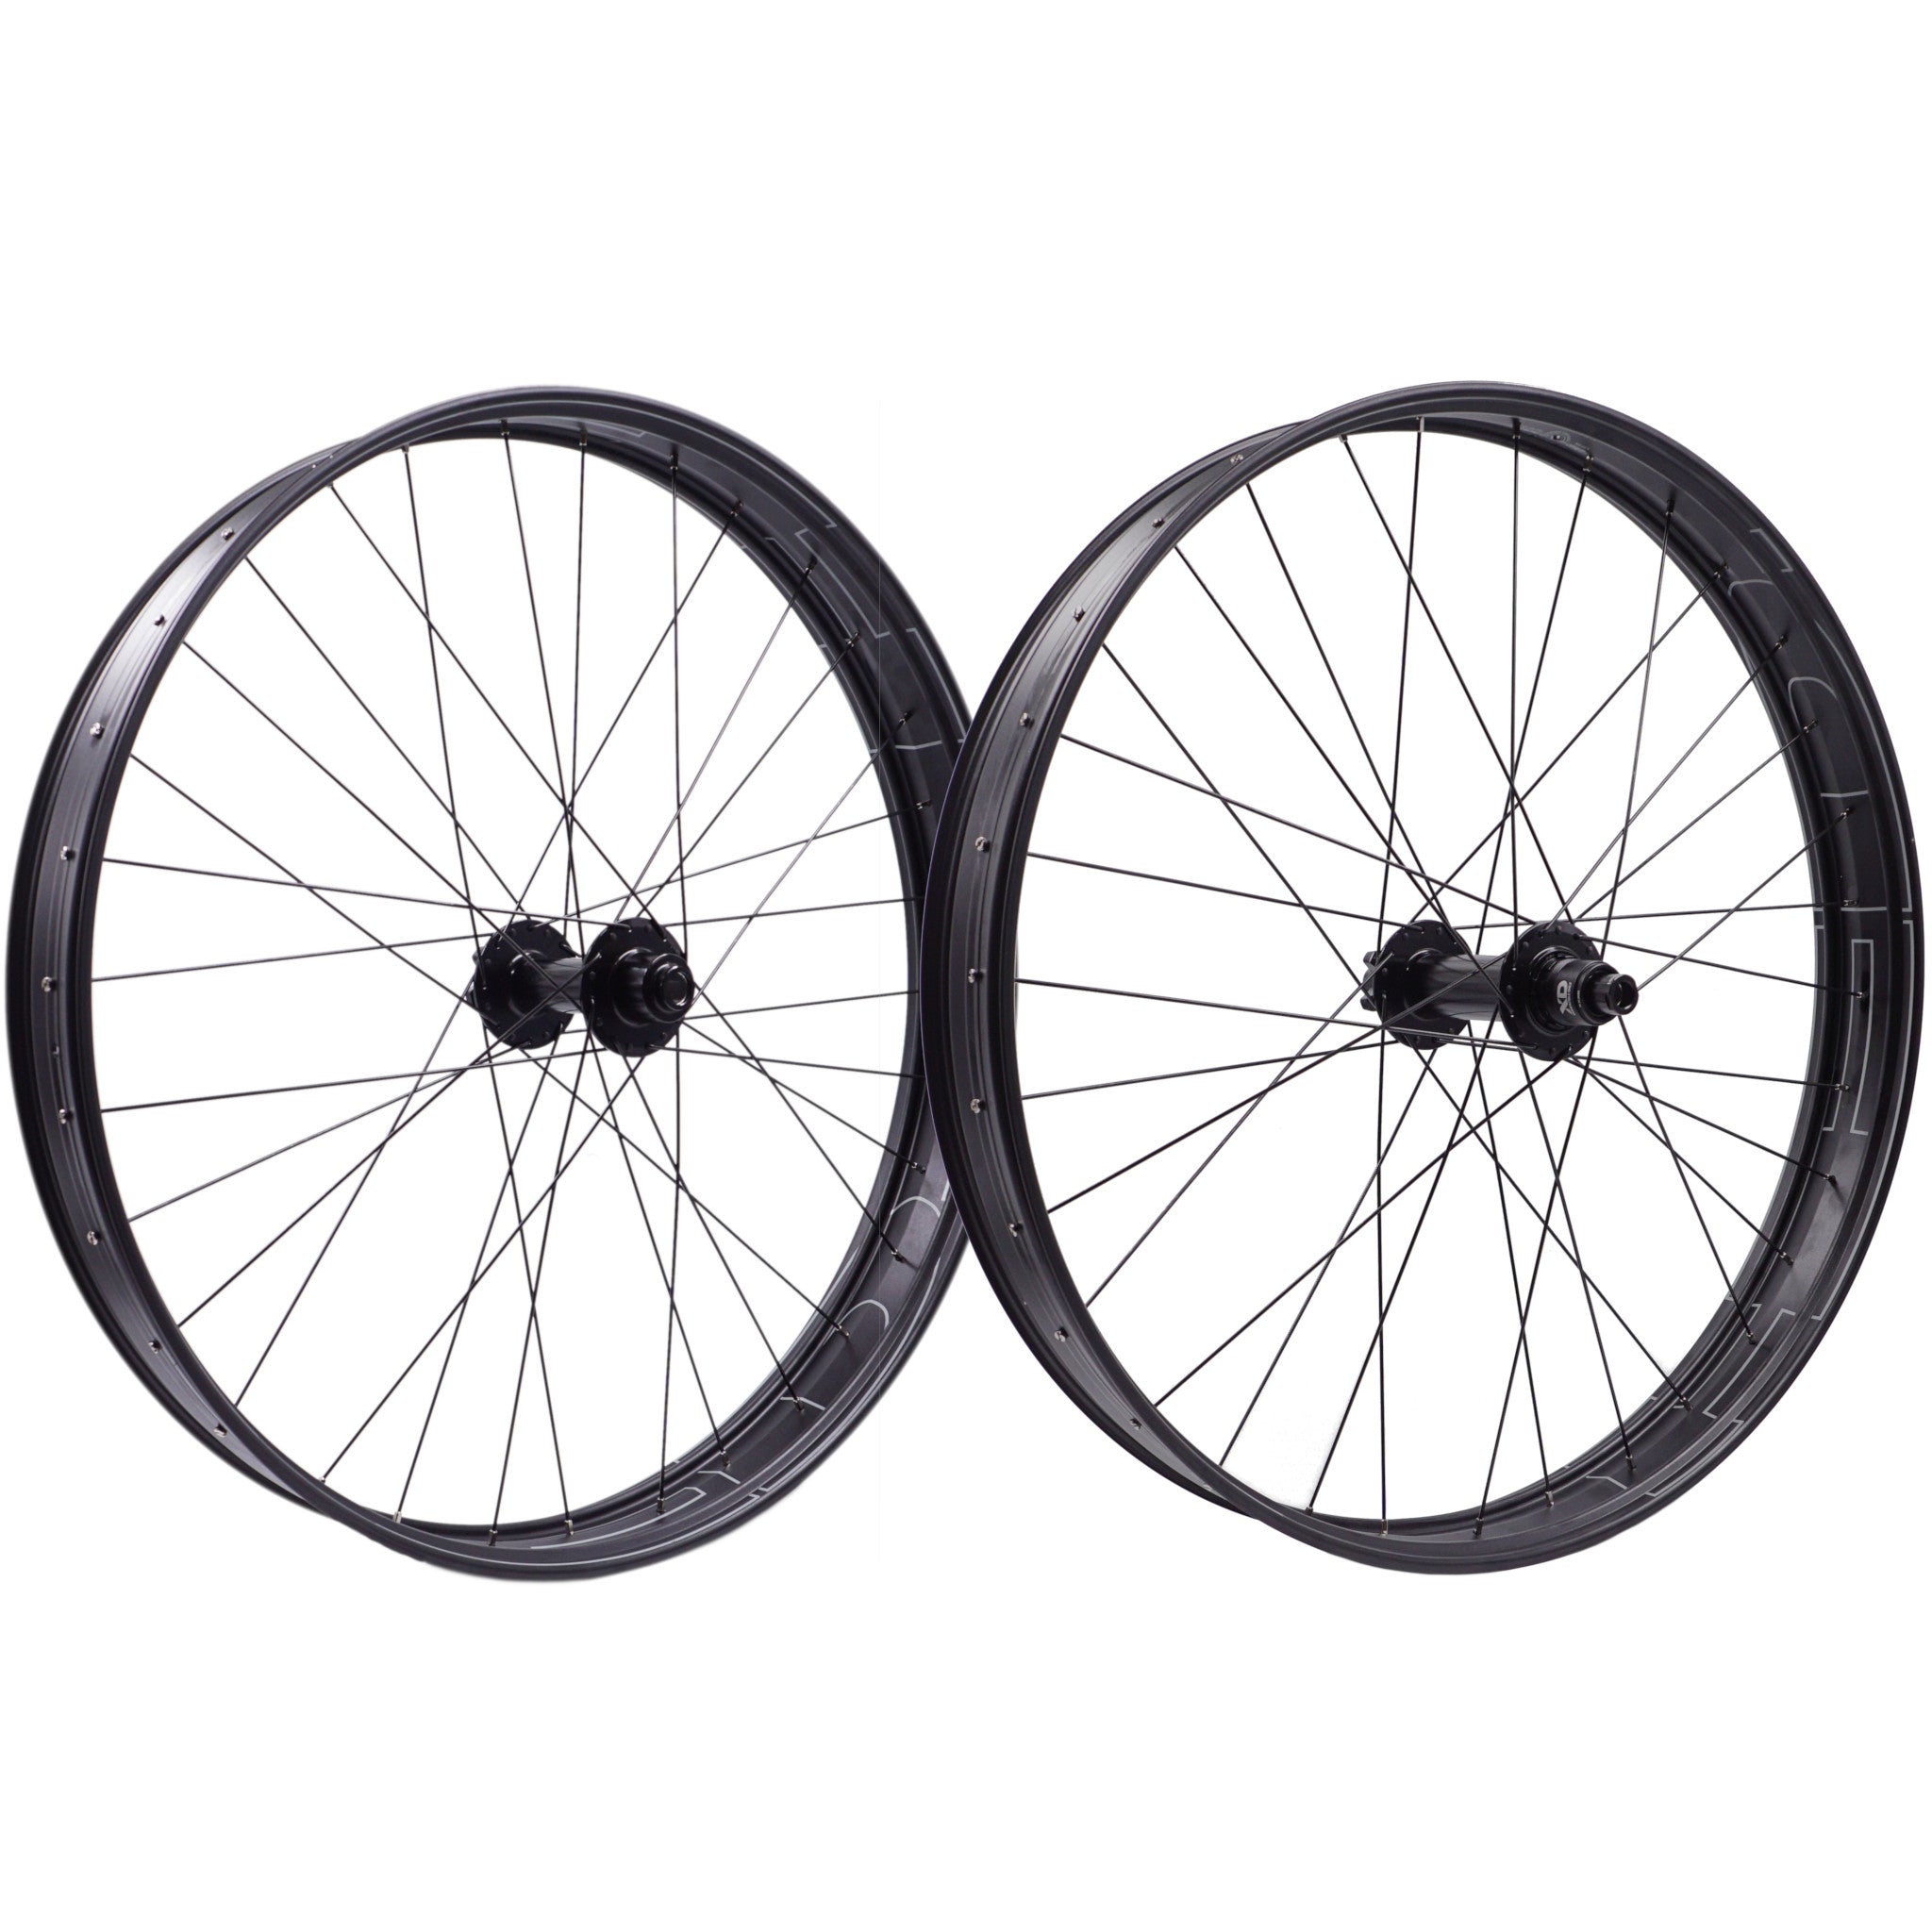 HEd 26" wheelset showing the XD driver on the rear wheel